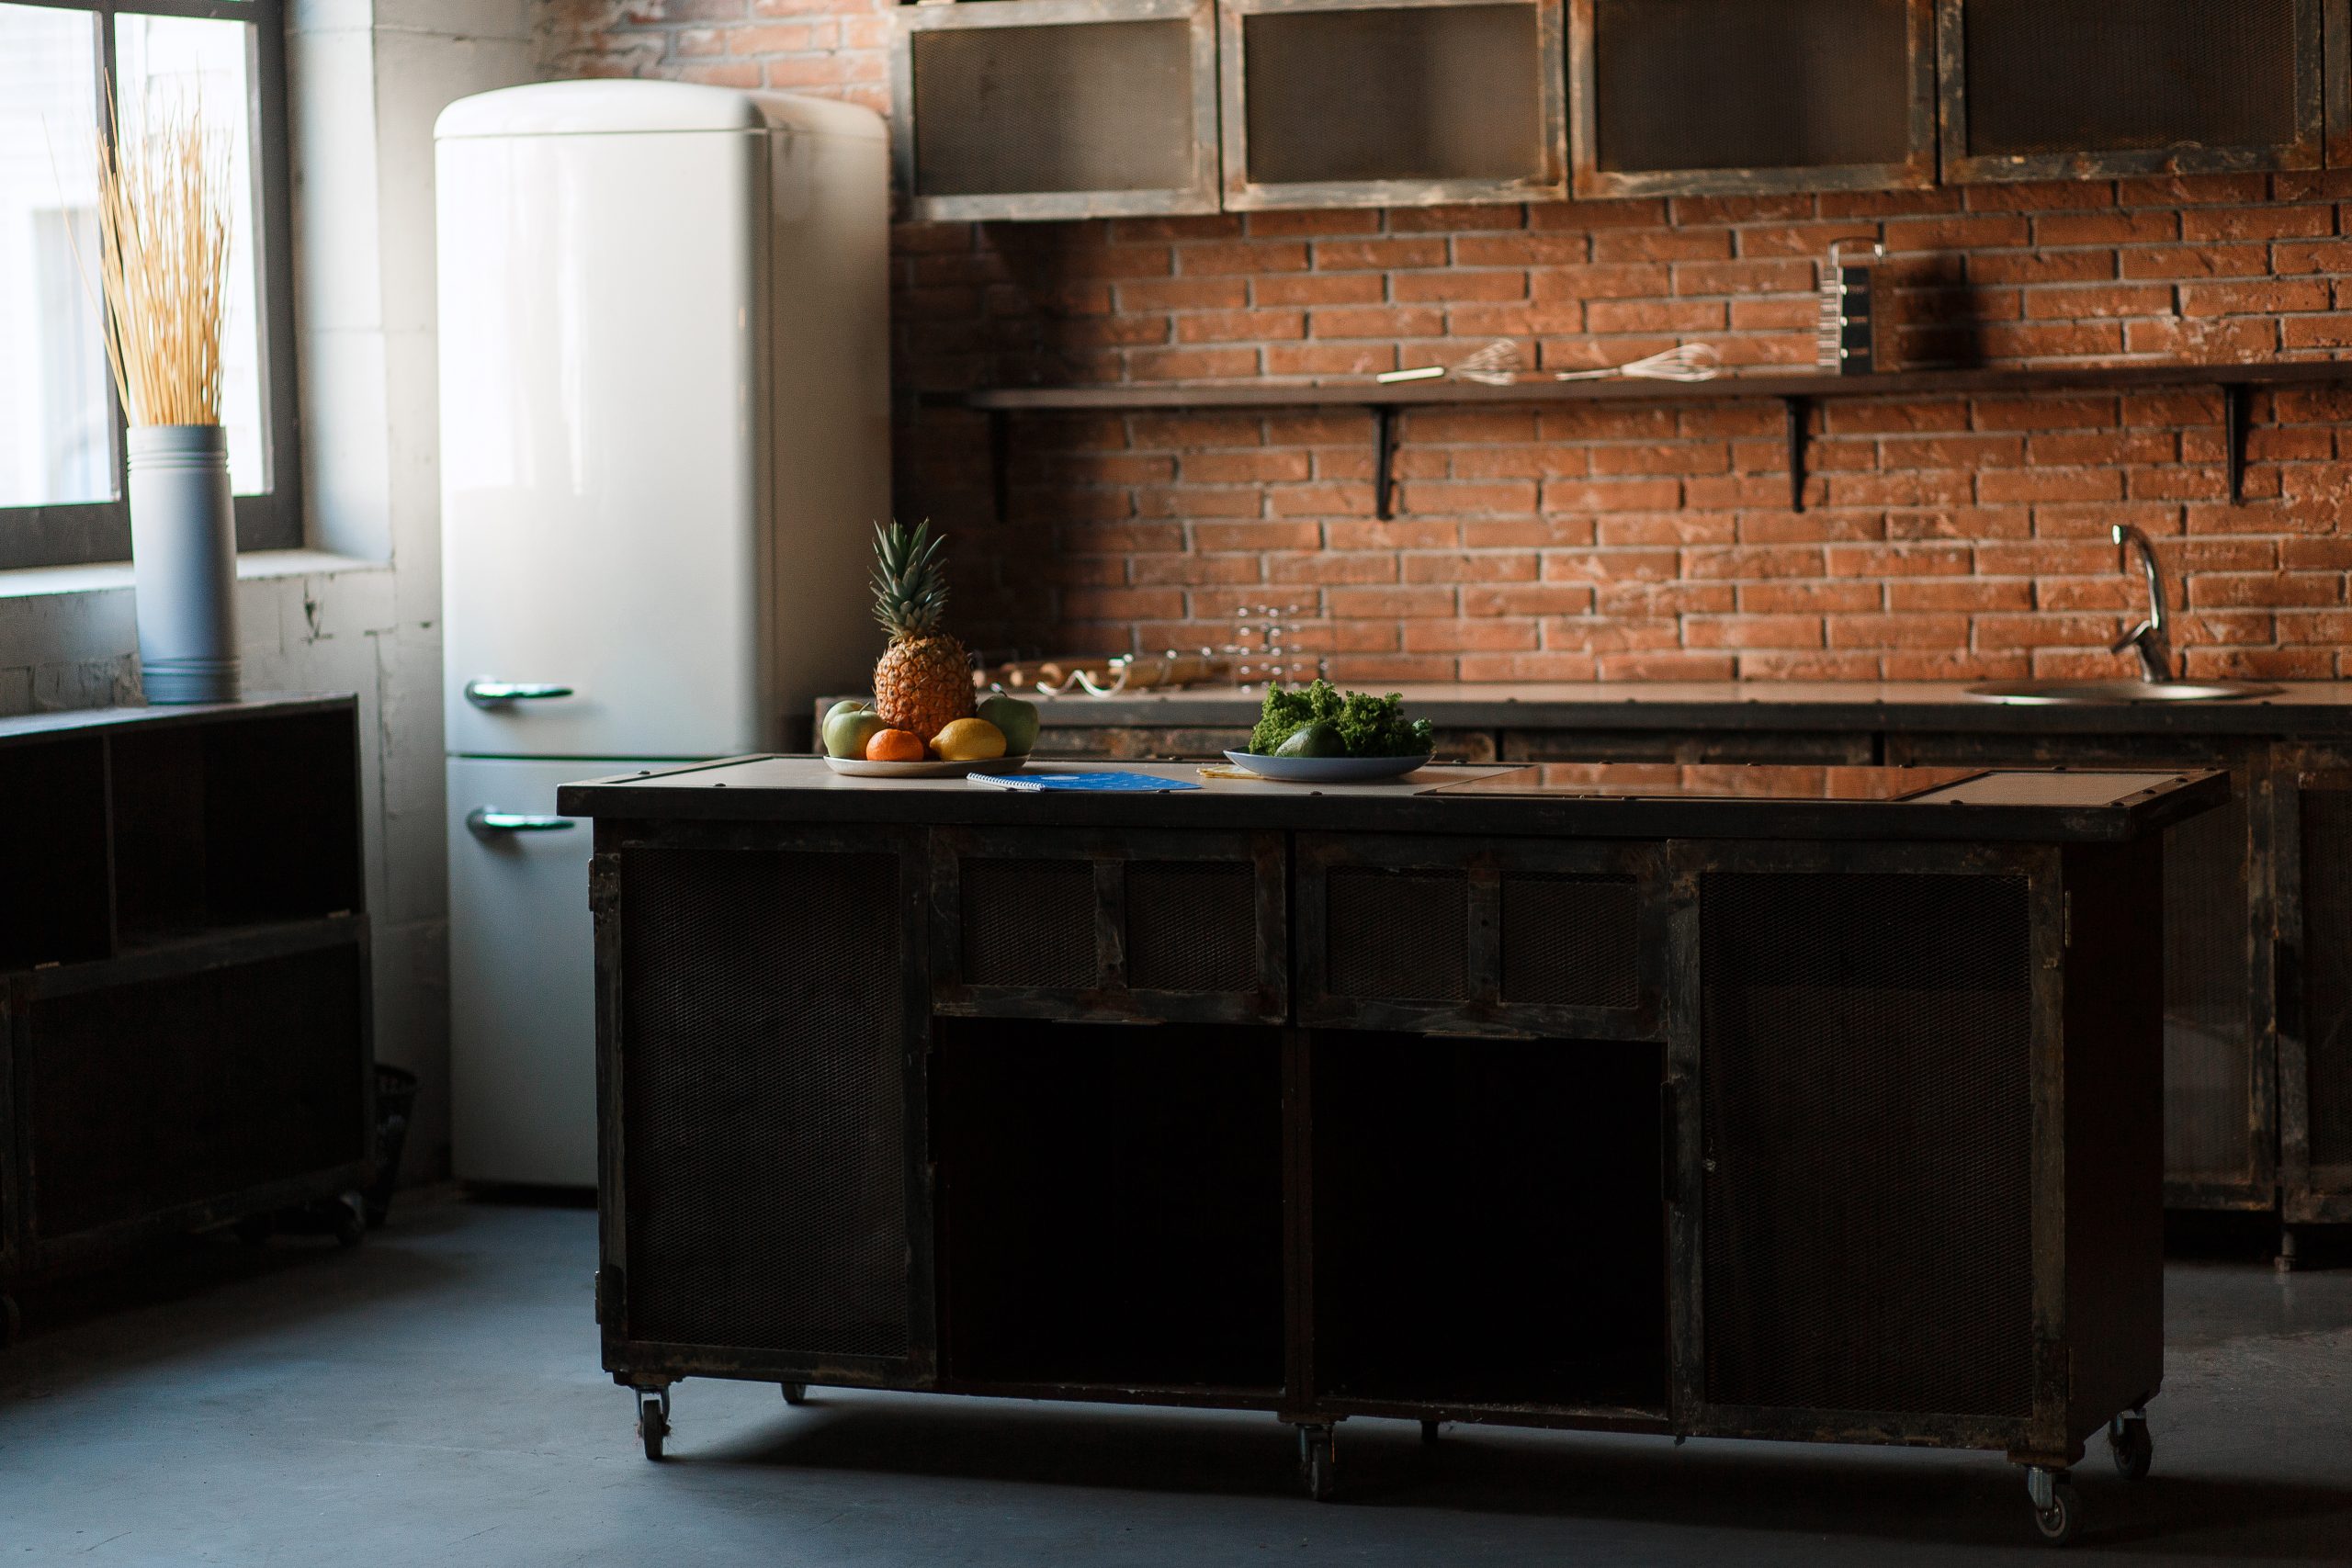 Dark loft kitchen with red brick wall. Kitchen table Cutlery, spoons, forks, breakfast fruit, fridge. Morning natural sunlight.